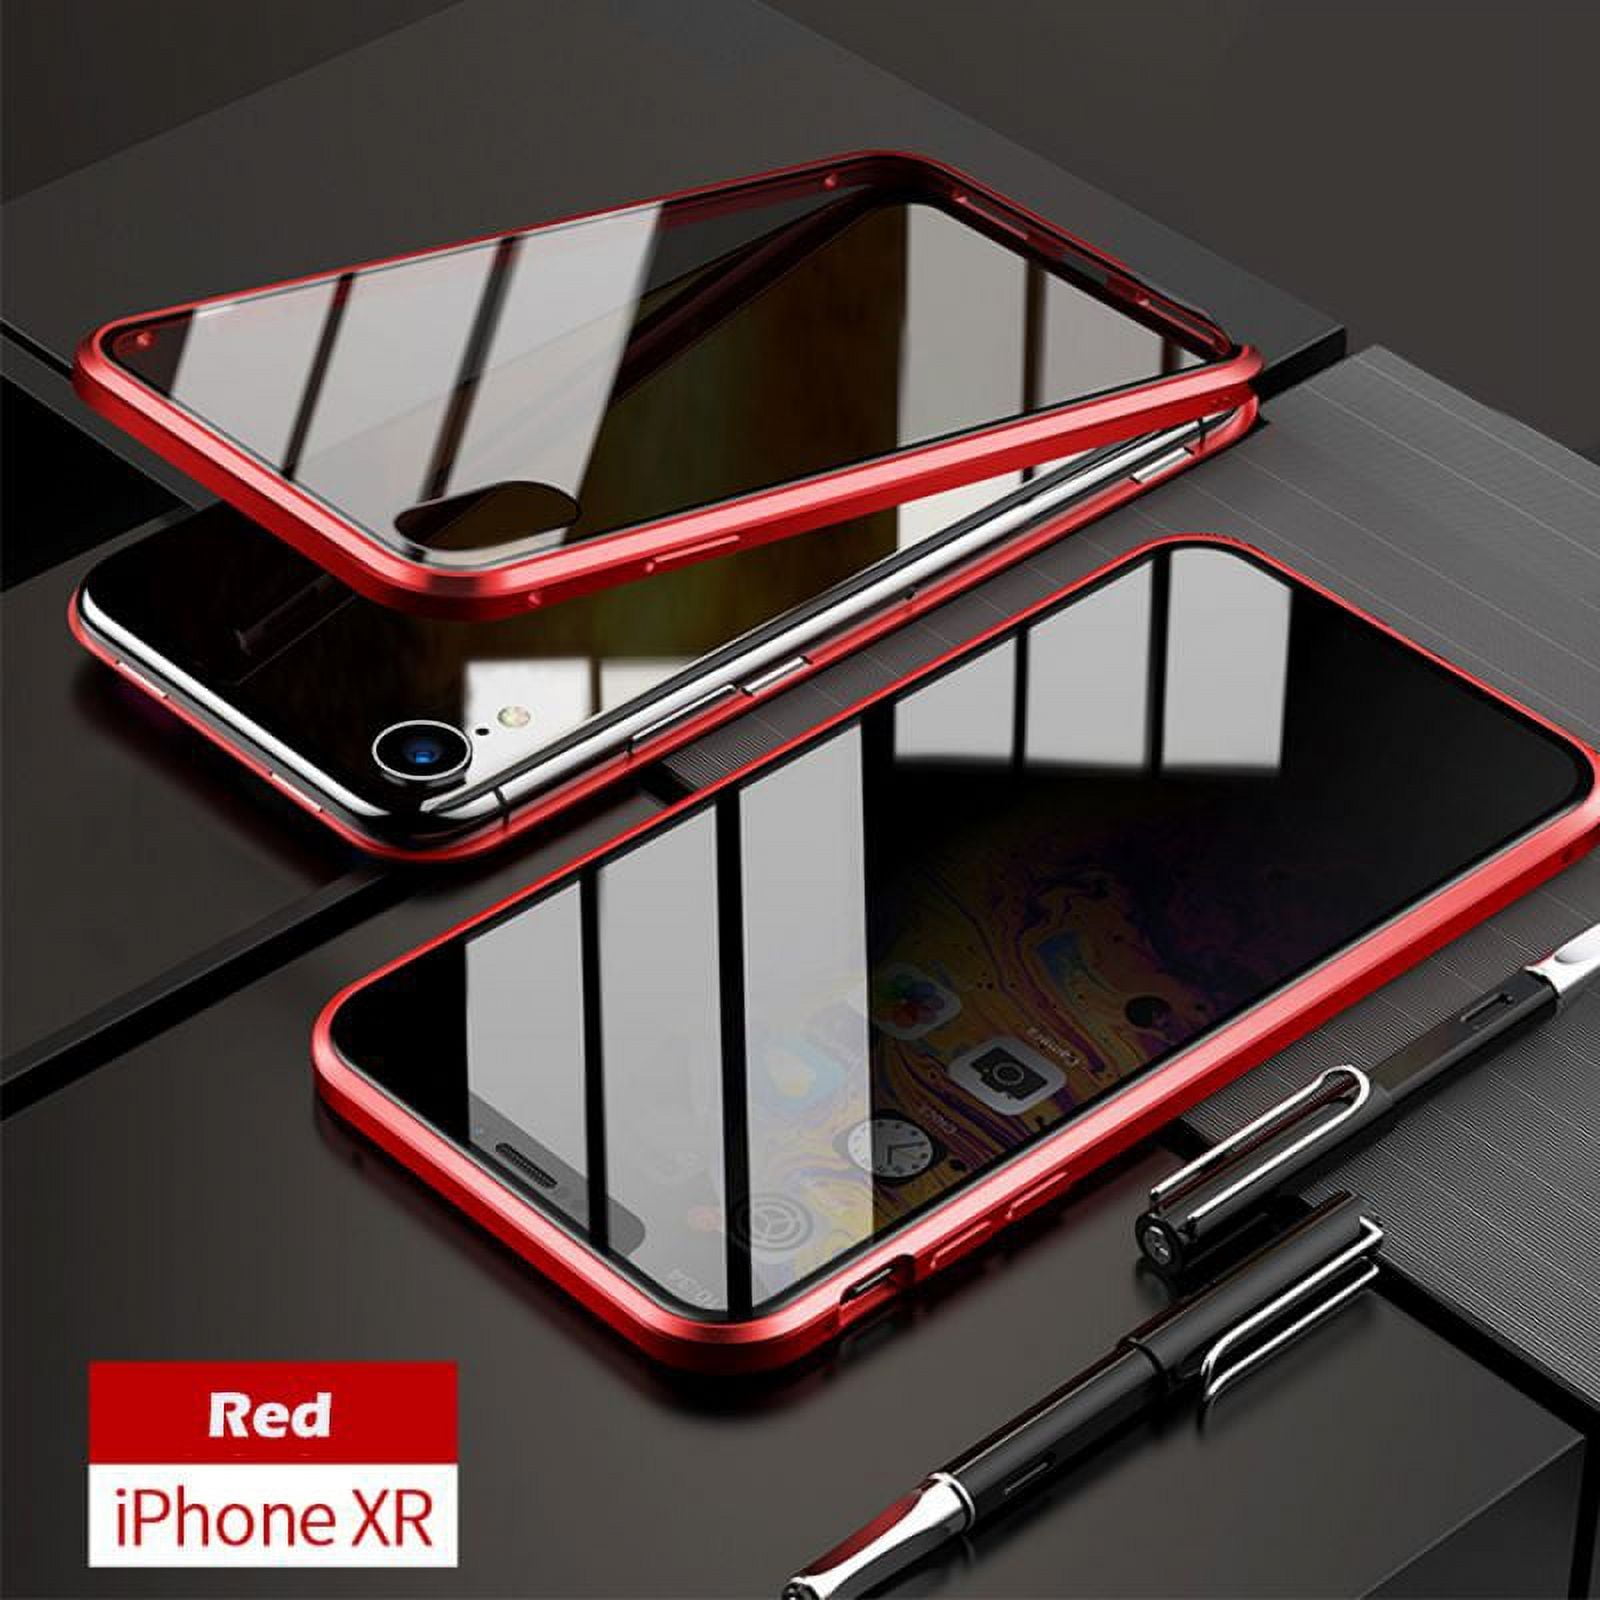  Cell Phone Case Tempered Glass Smart Phone iPhone Case